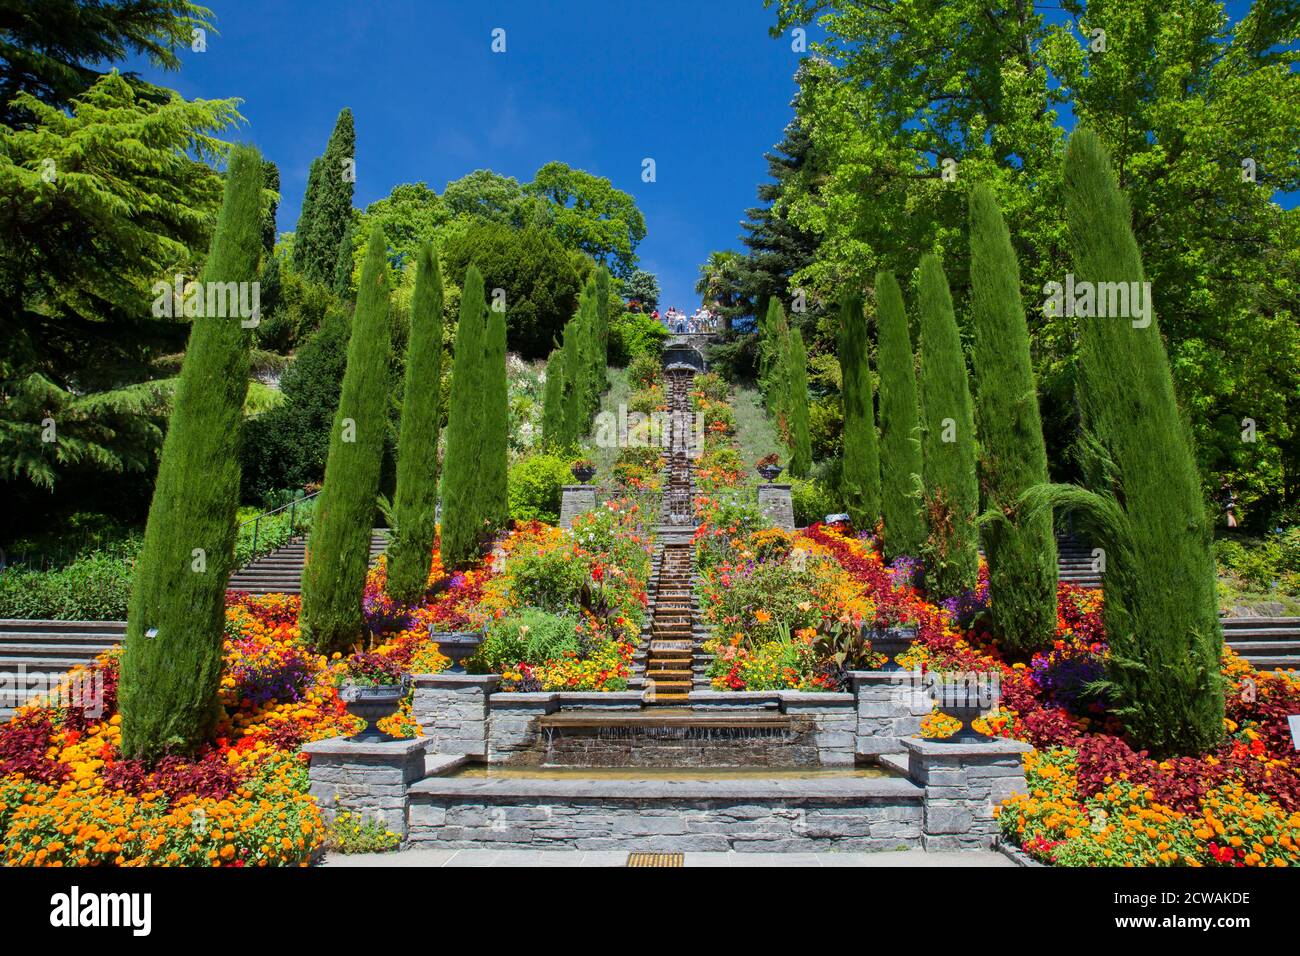 Italy Flower stairs and bed of flowers, Mainau Island, Baden-Württemberg, Germany, Europe Stock Photo